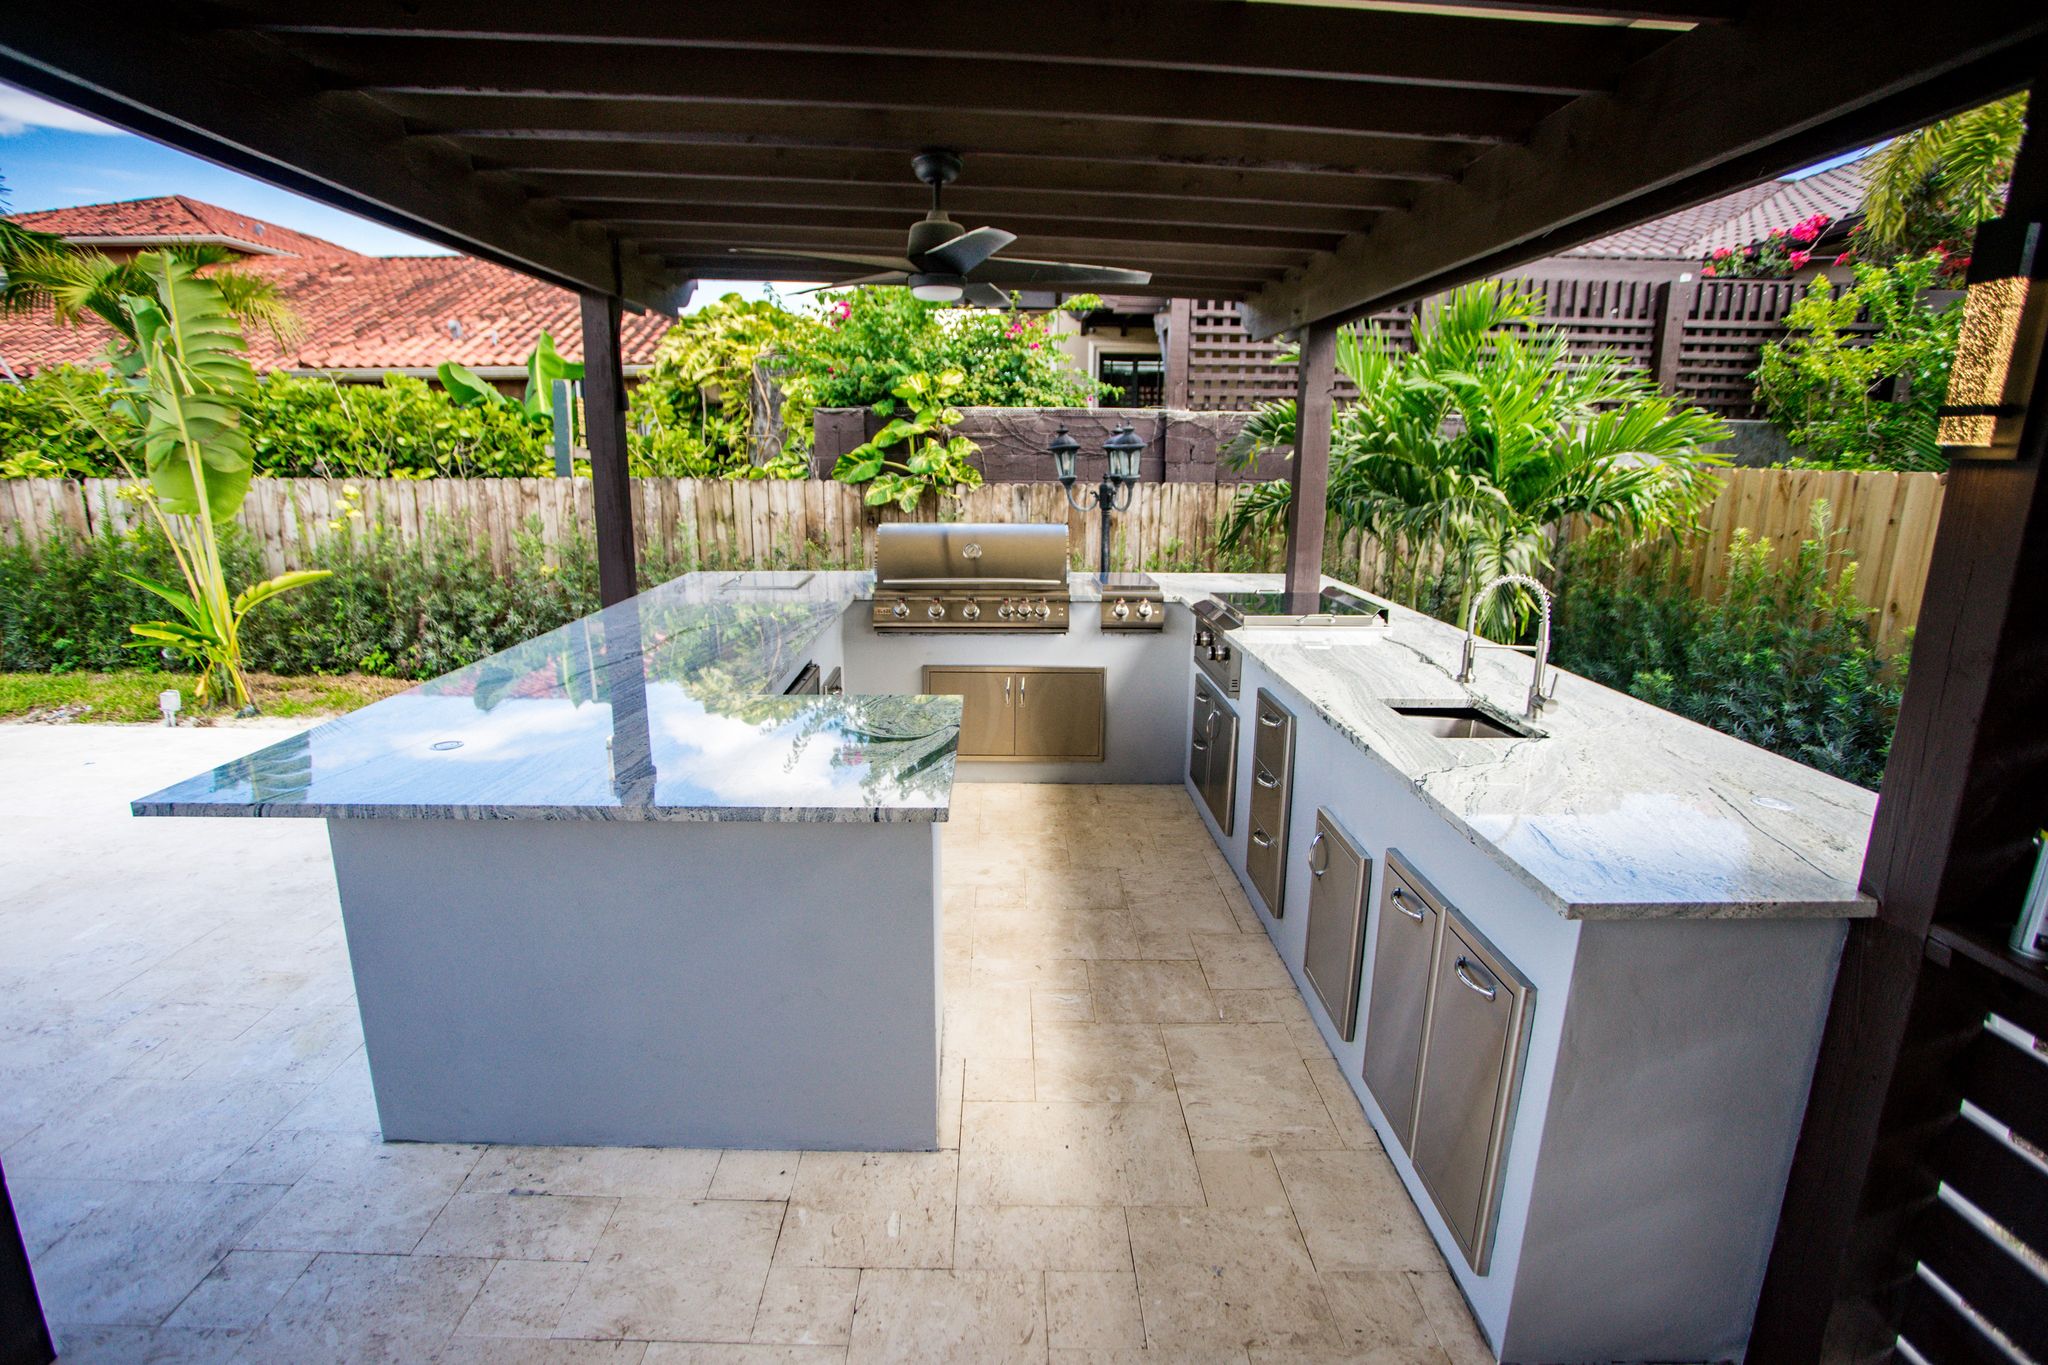 Planning a Modern Summer Kitchen: Outdoor Kitchen Cabinets, Countertops,  and More